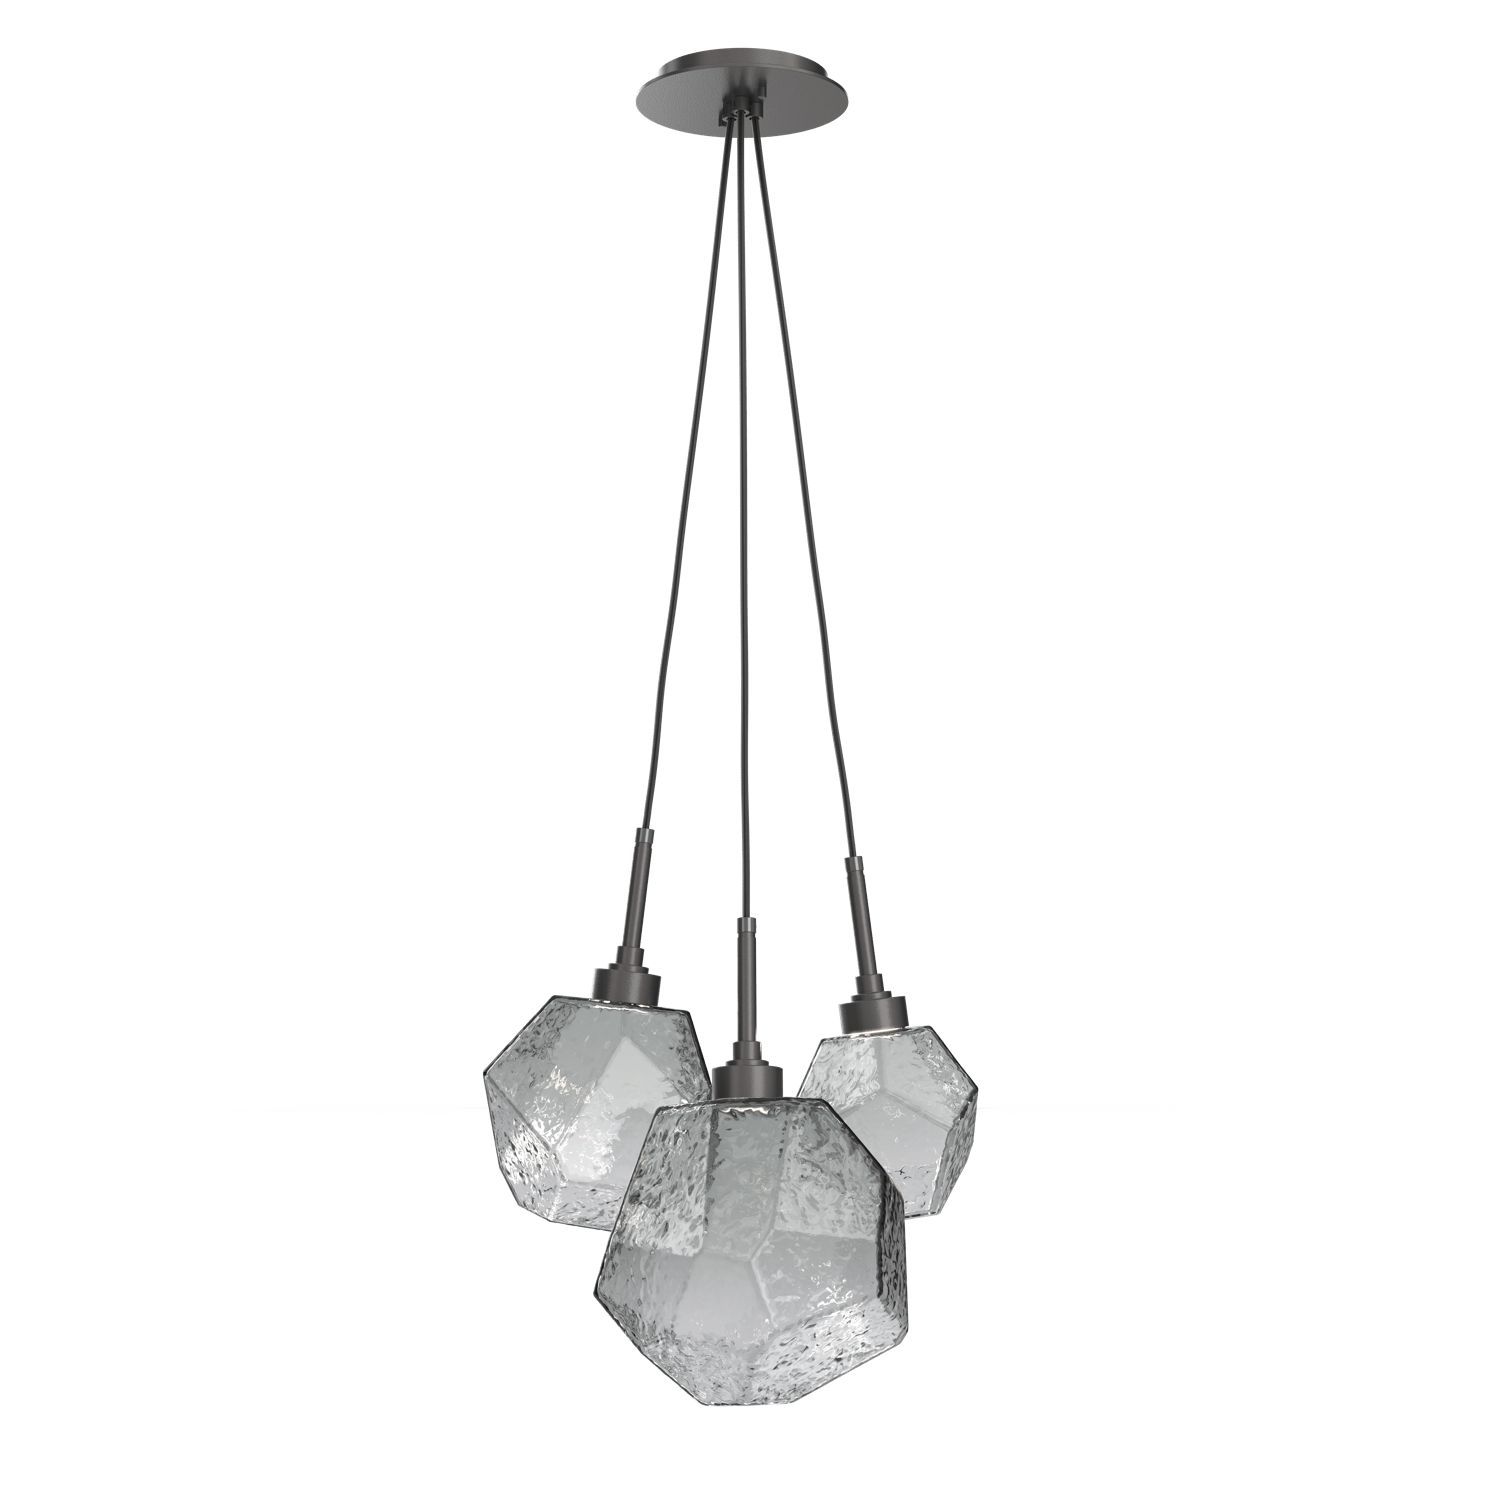 CHB0039-0E-GP-S-Hammerton-Studio-Gem-3-light-cluster-pendant-light-with-graphite-finish-and-smoke-blown-glass-shades-and-LED-lamping